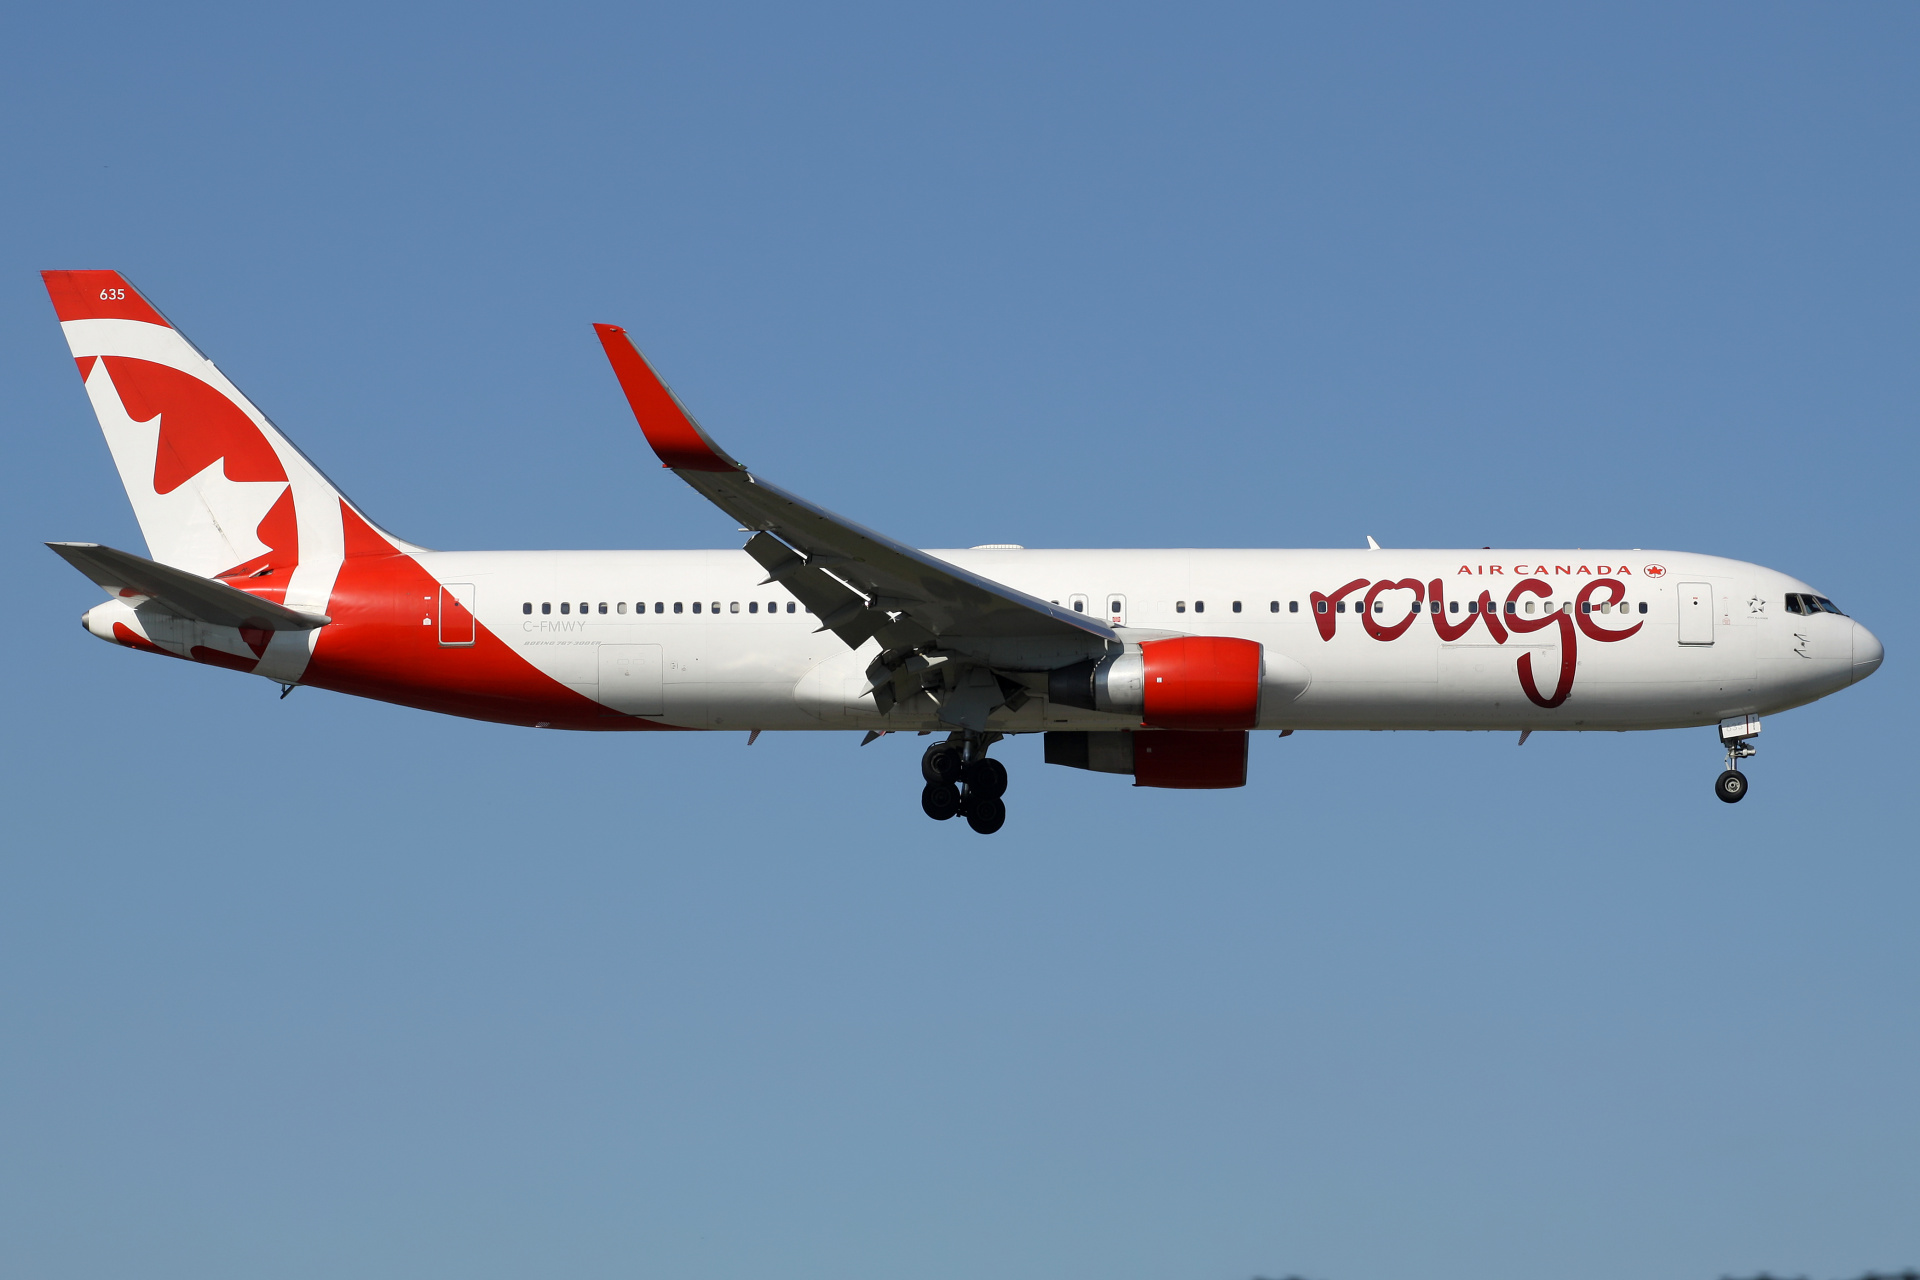 C-FMWY (Aircraft » EPWA Spotting » Boeing 767-300 » Air Canada Rouge)